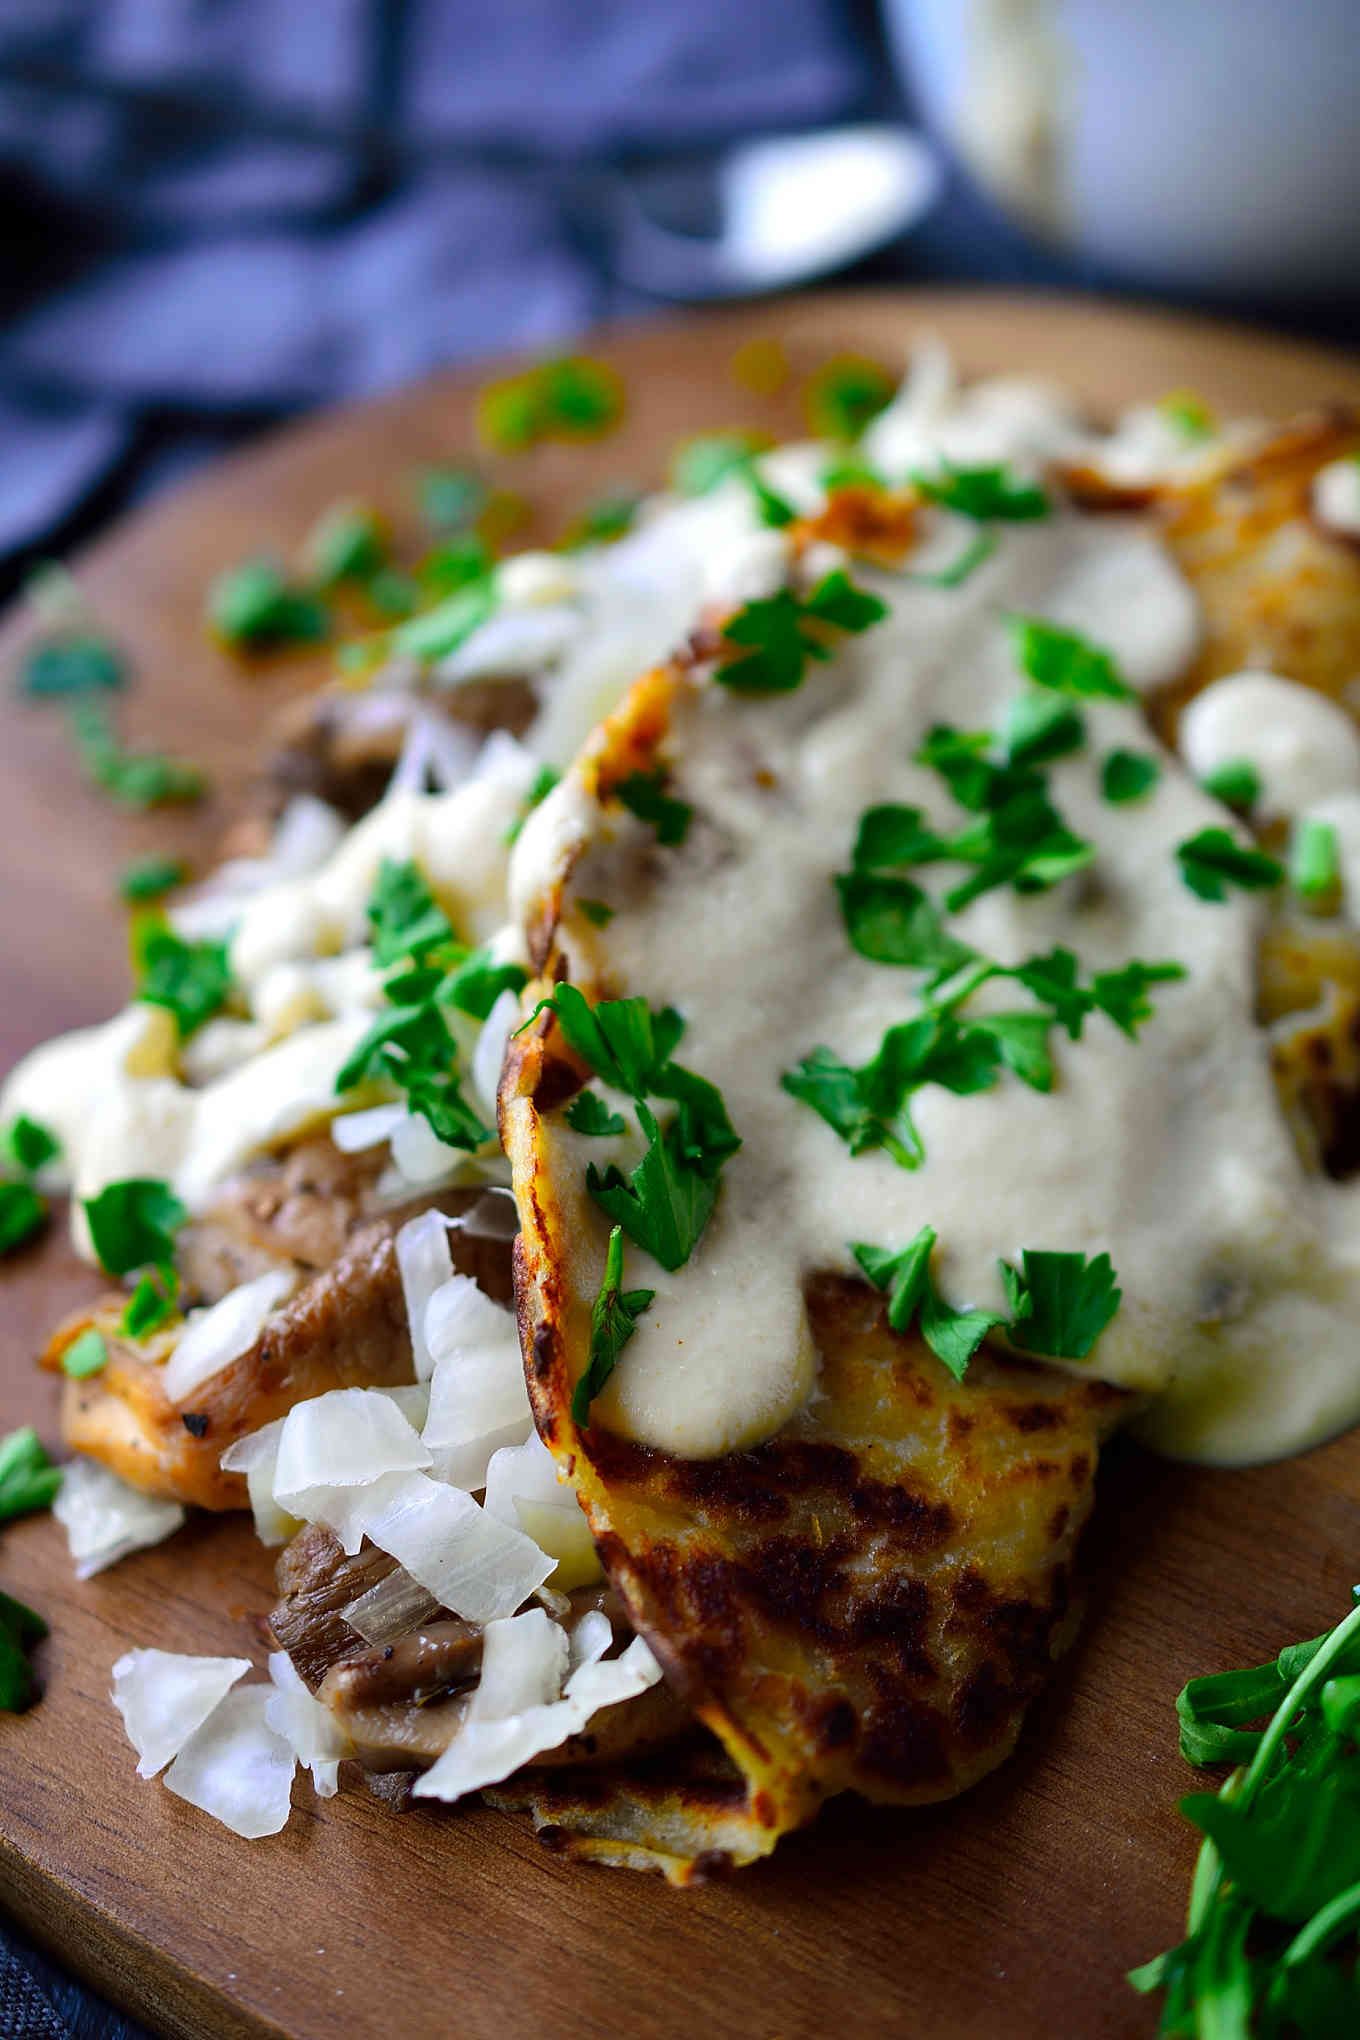 These vegan potato pancakes are based on a traditional Irish boxty recipe and stuffed with sautéed mushrooms and sauerkraut and topped with a creamy vegan mustard sauce. They’re incredibly easy to make and great served for breakfast, lunch or dinner! 